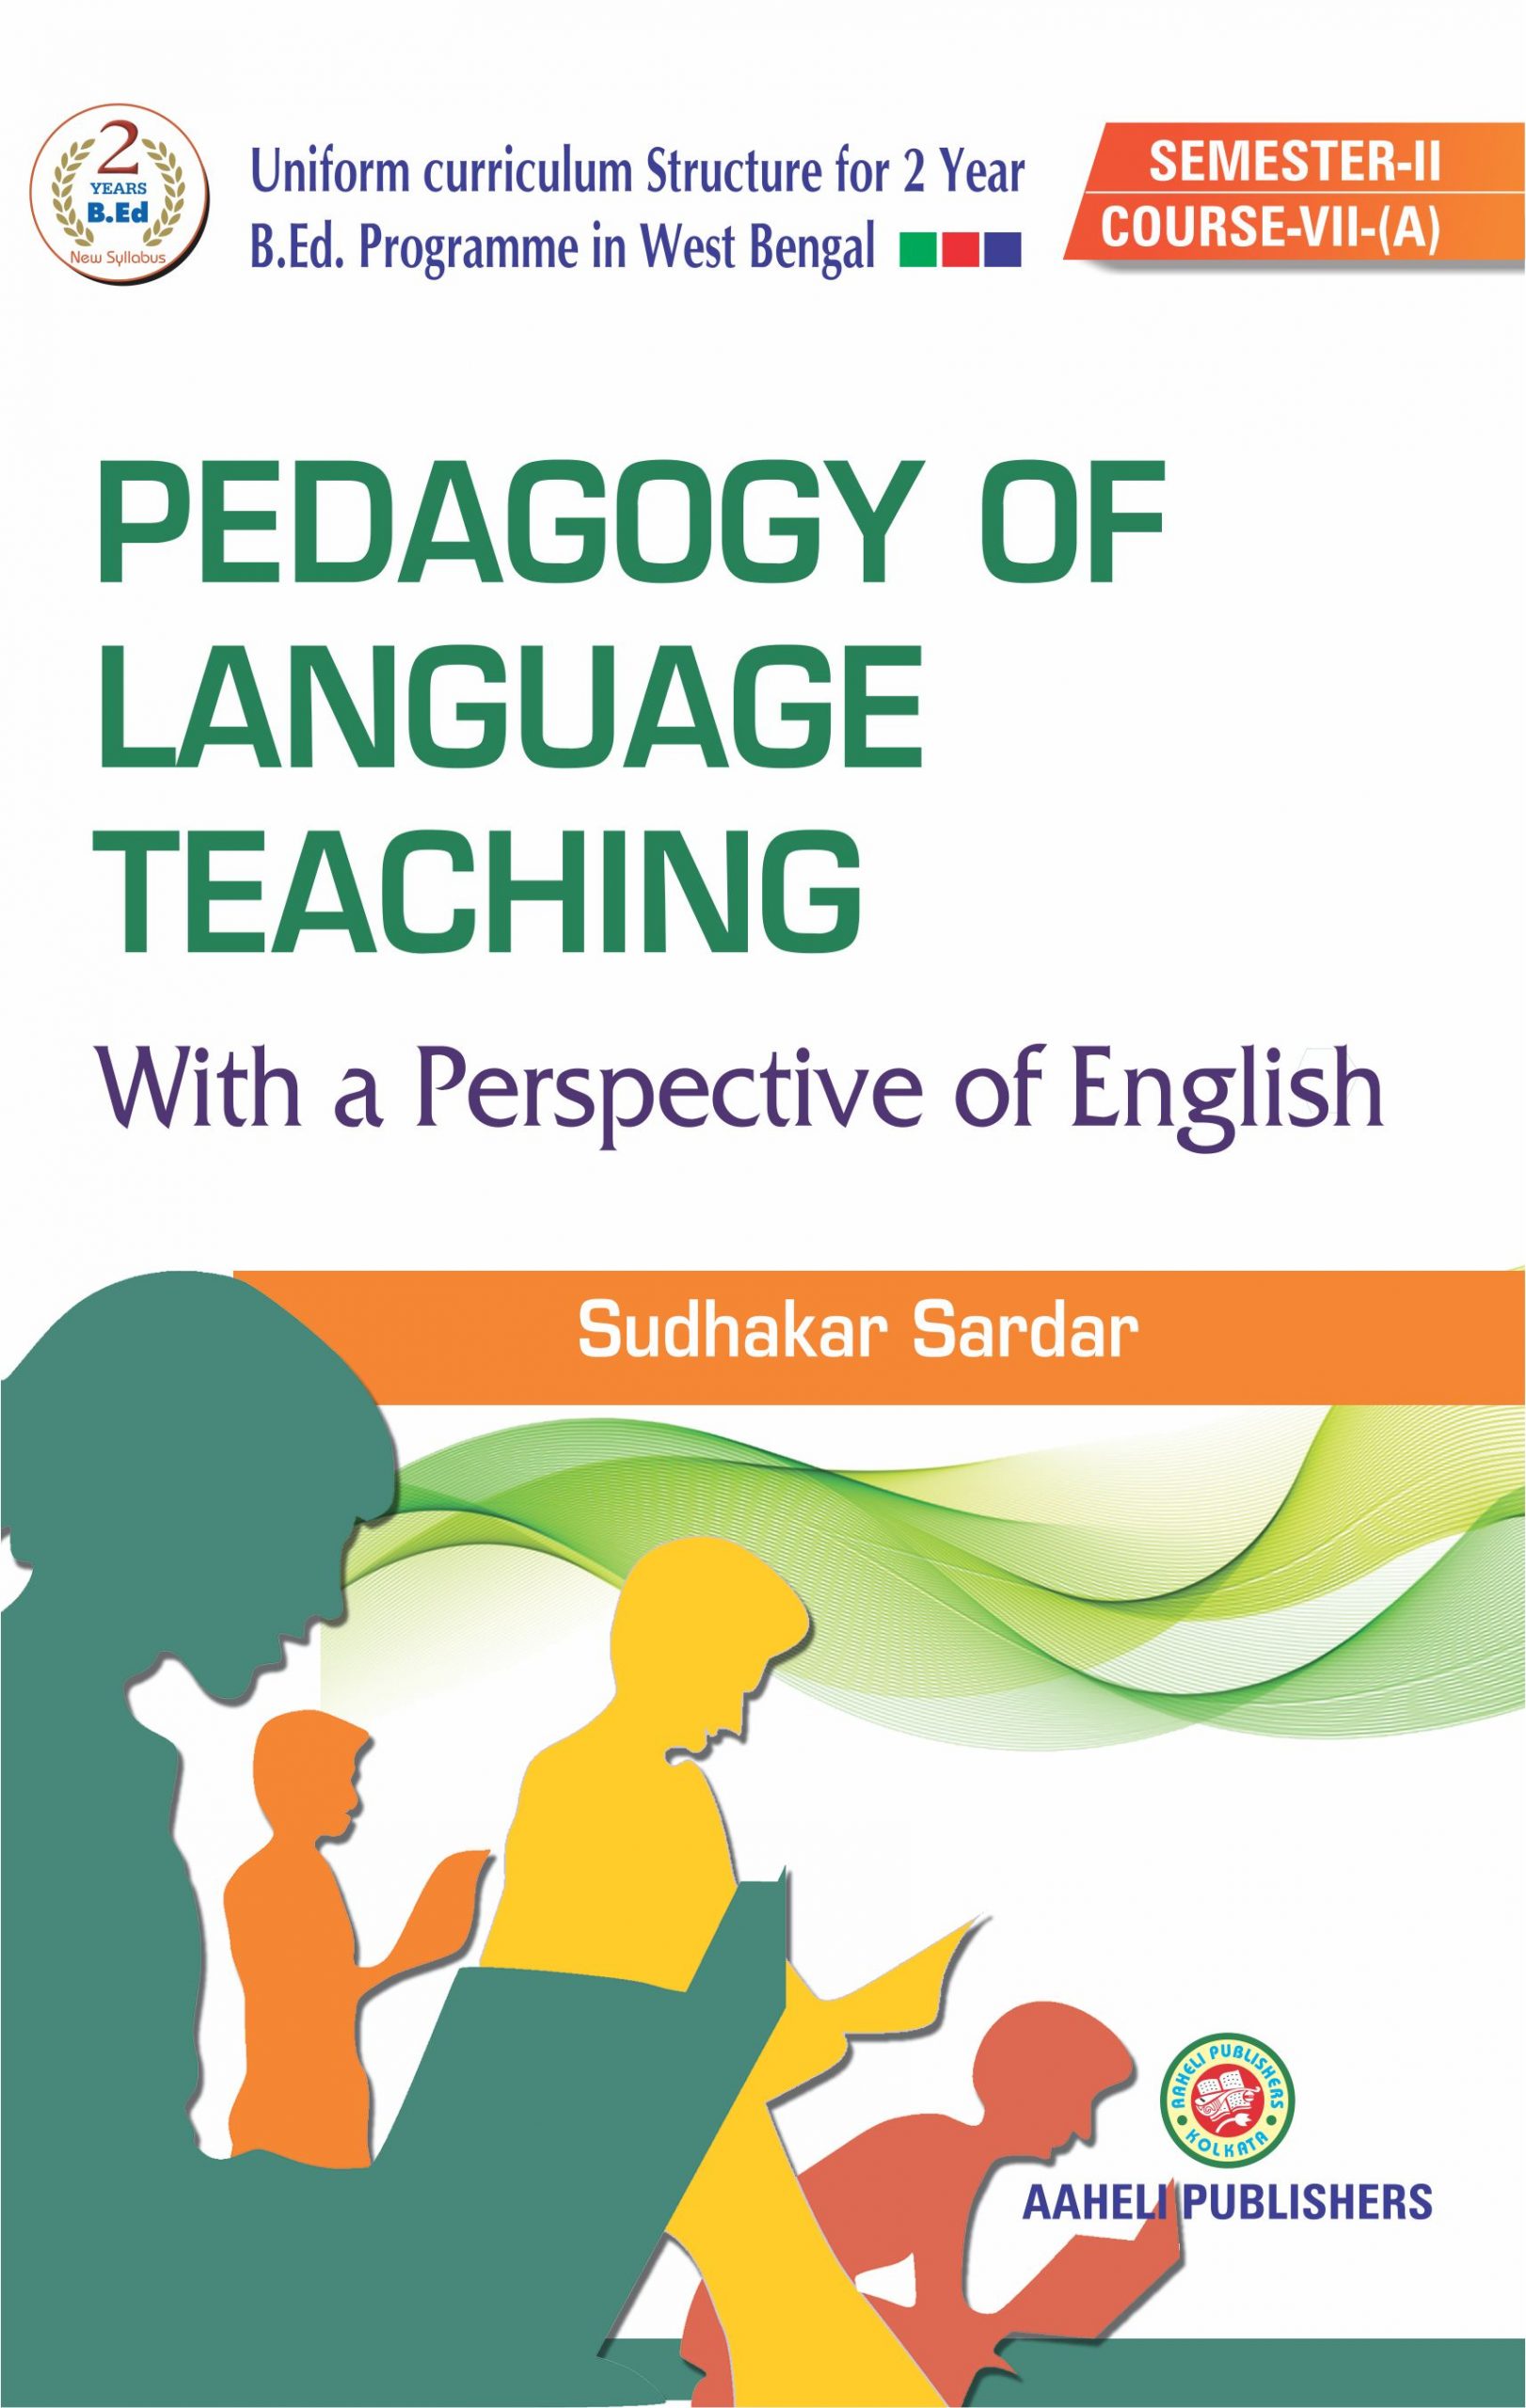 Pedagogy of Language Teaching With a Perspective Of English, 2nd Semester B.ED 2022-23